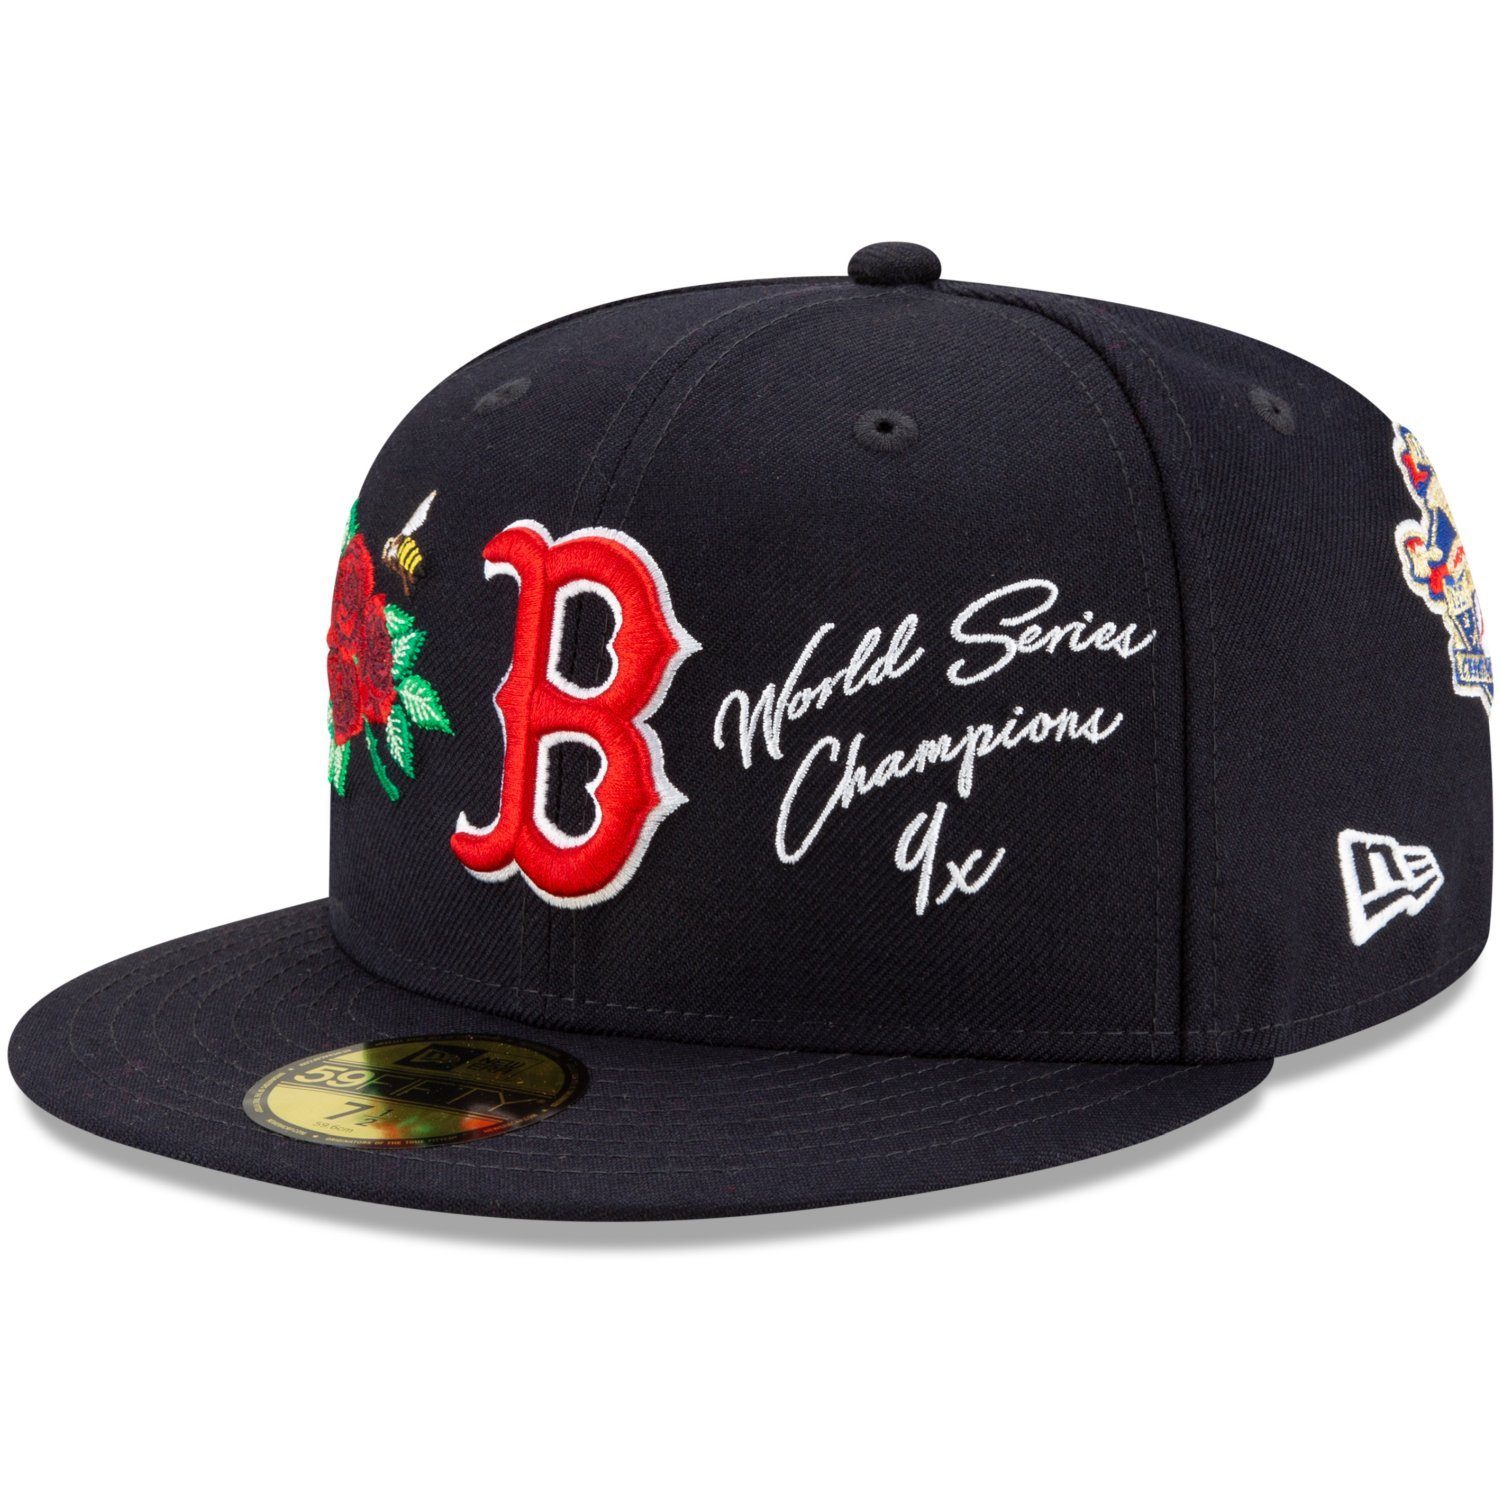 New Era 59Fifty Sox Boston Cap Red GRAPHIC Fitted